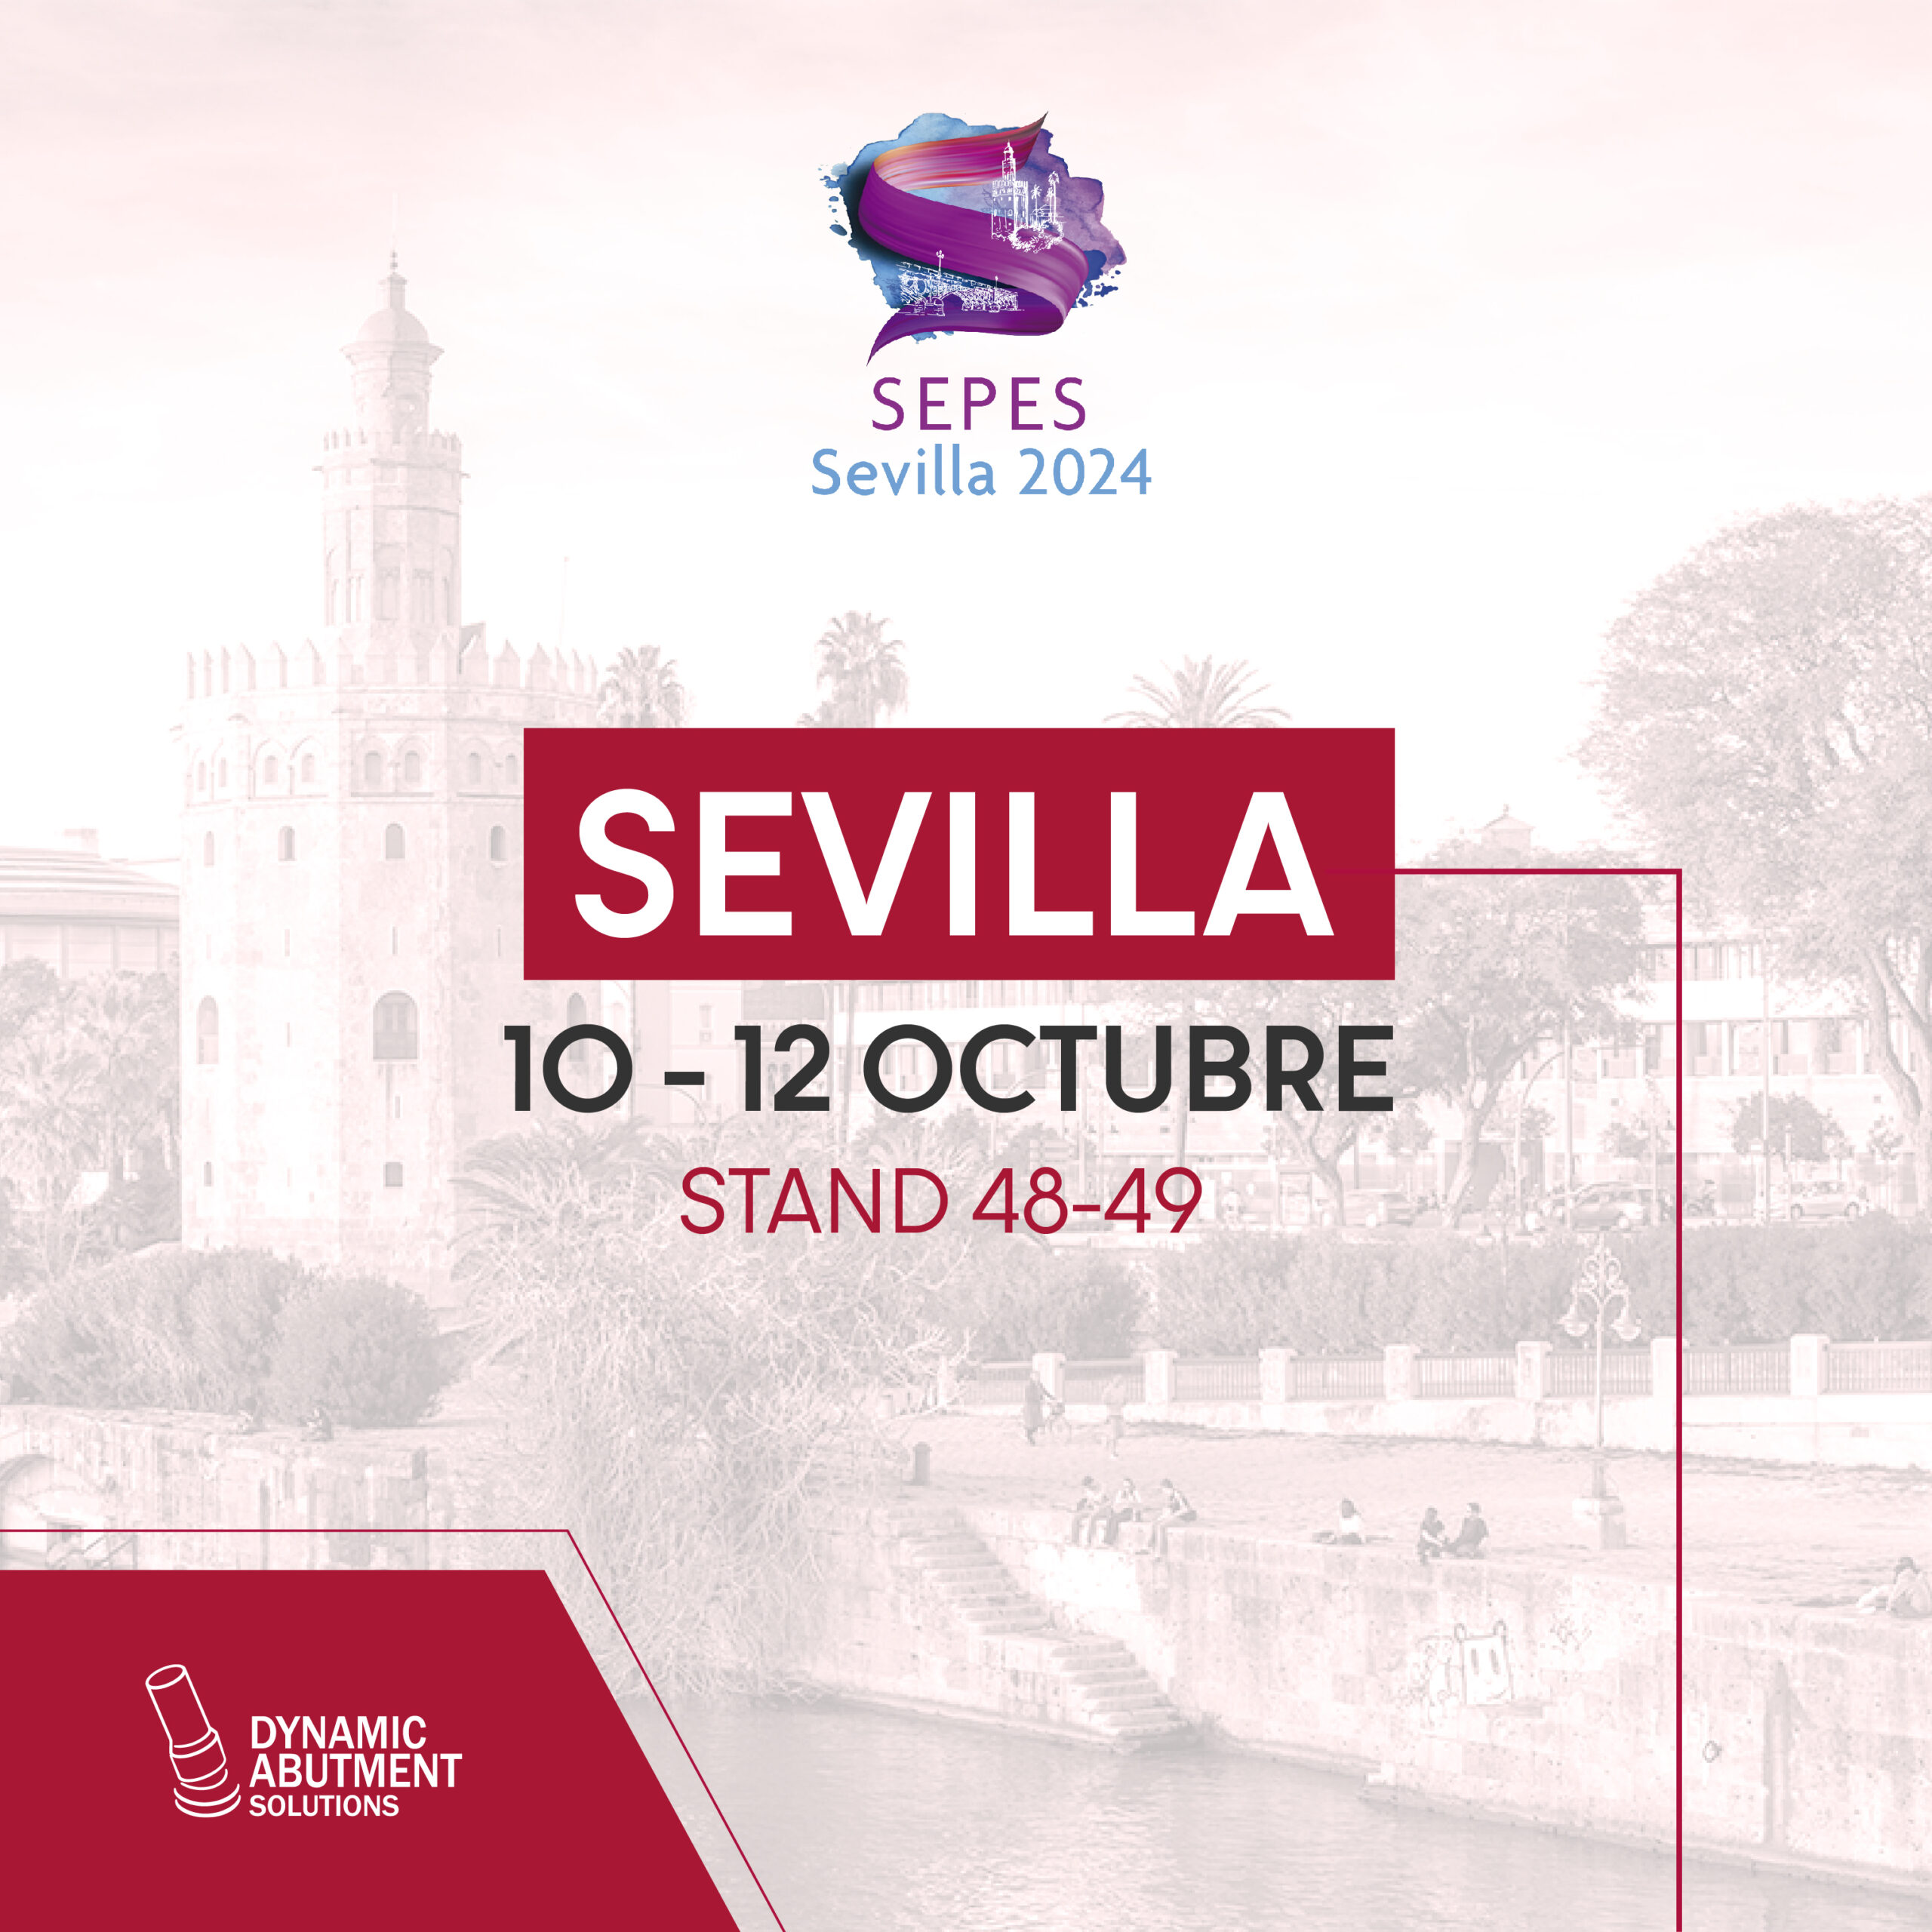 Featured image for “Se acerca SEPES Sevilla 2024”